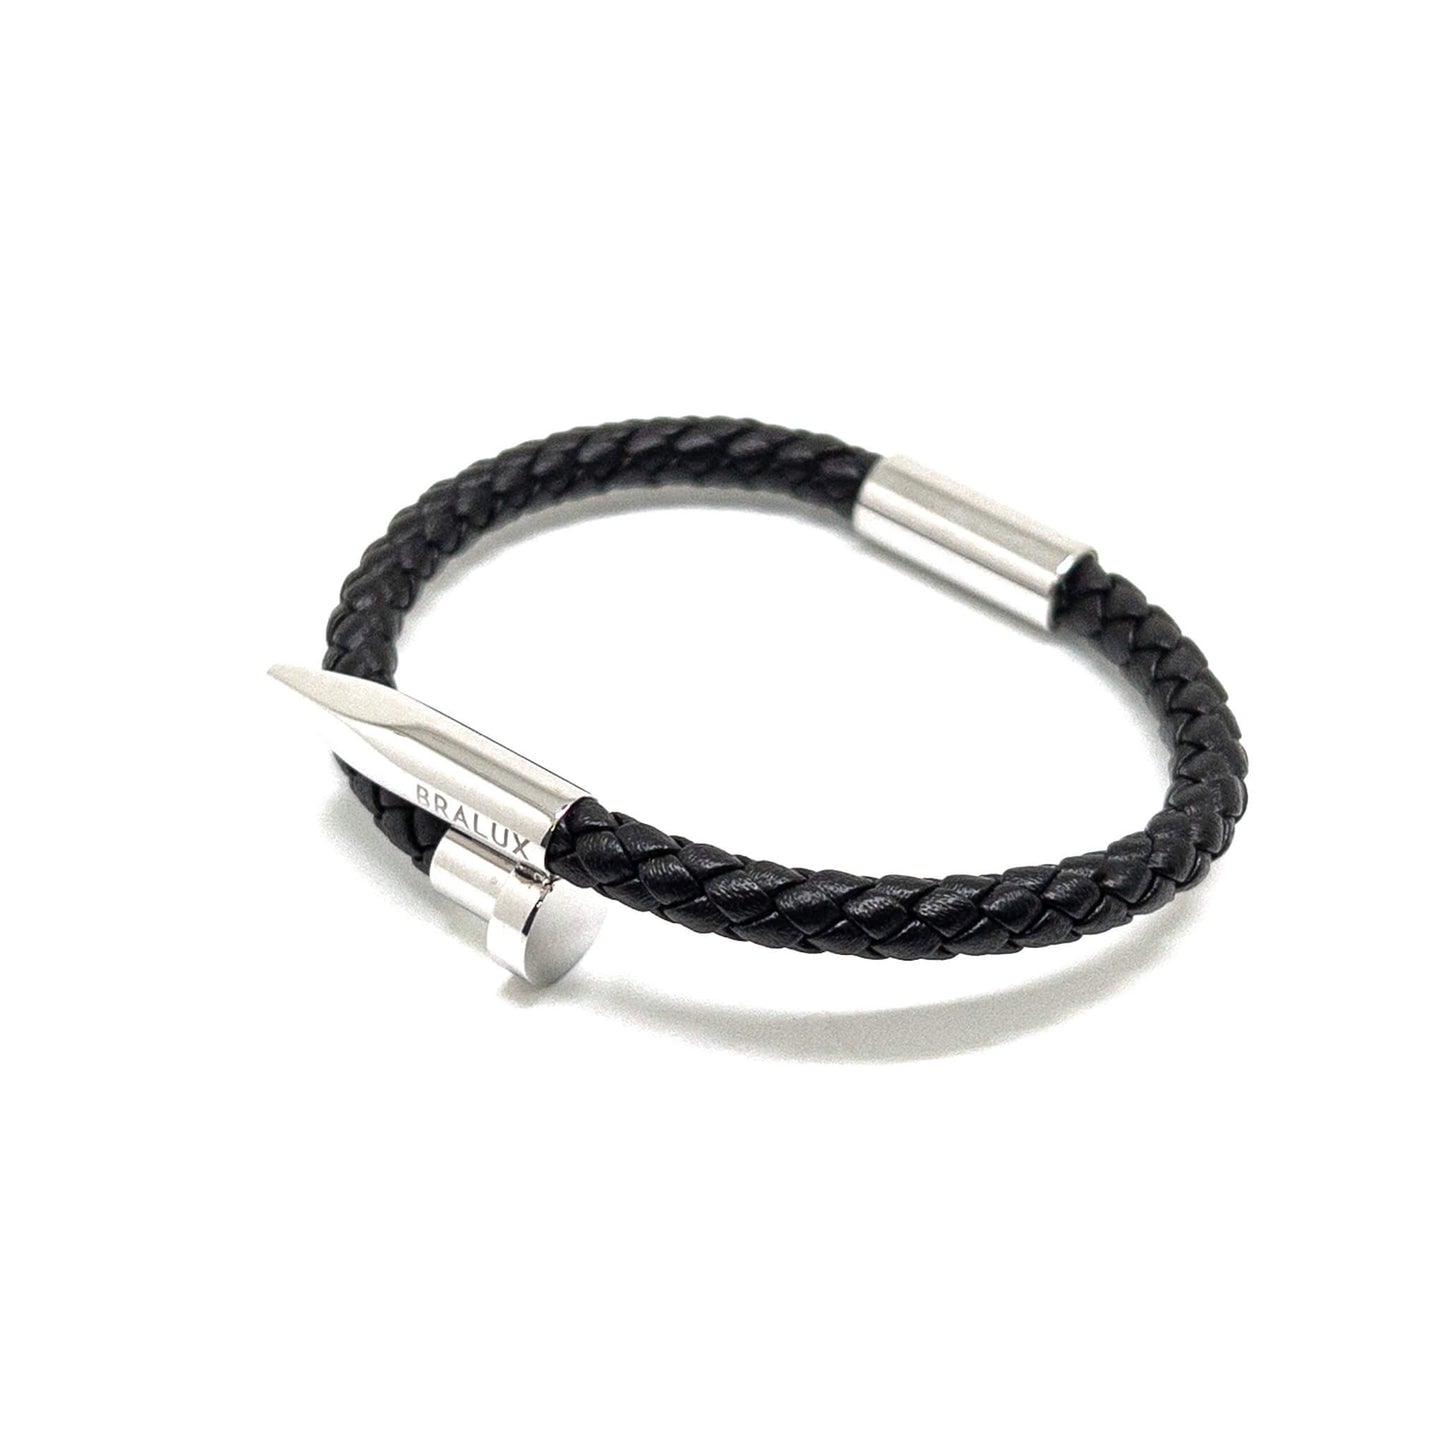 The Black and Gold plated leather bracelet